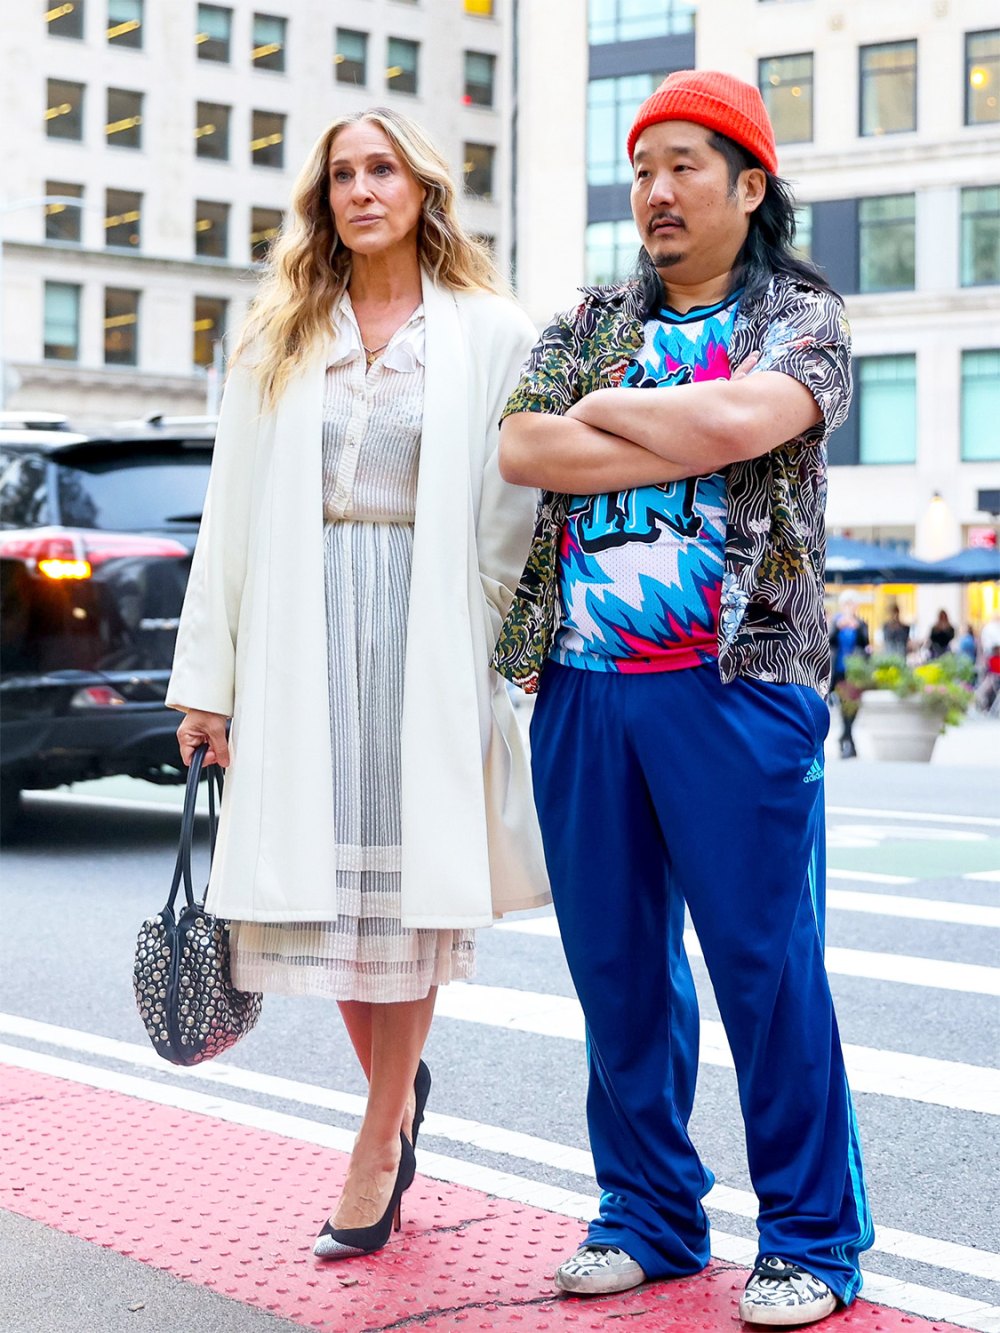 Bobby Lee Recalls Filming And Just Like That With Sarah Jessica Parker While Blackout Drunk High